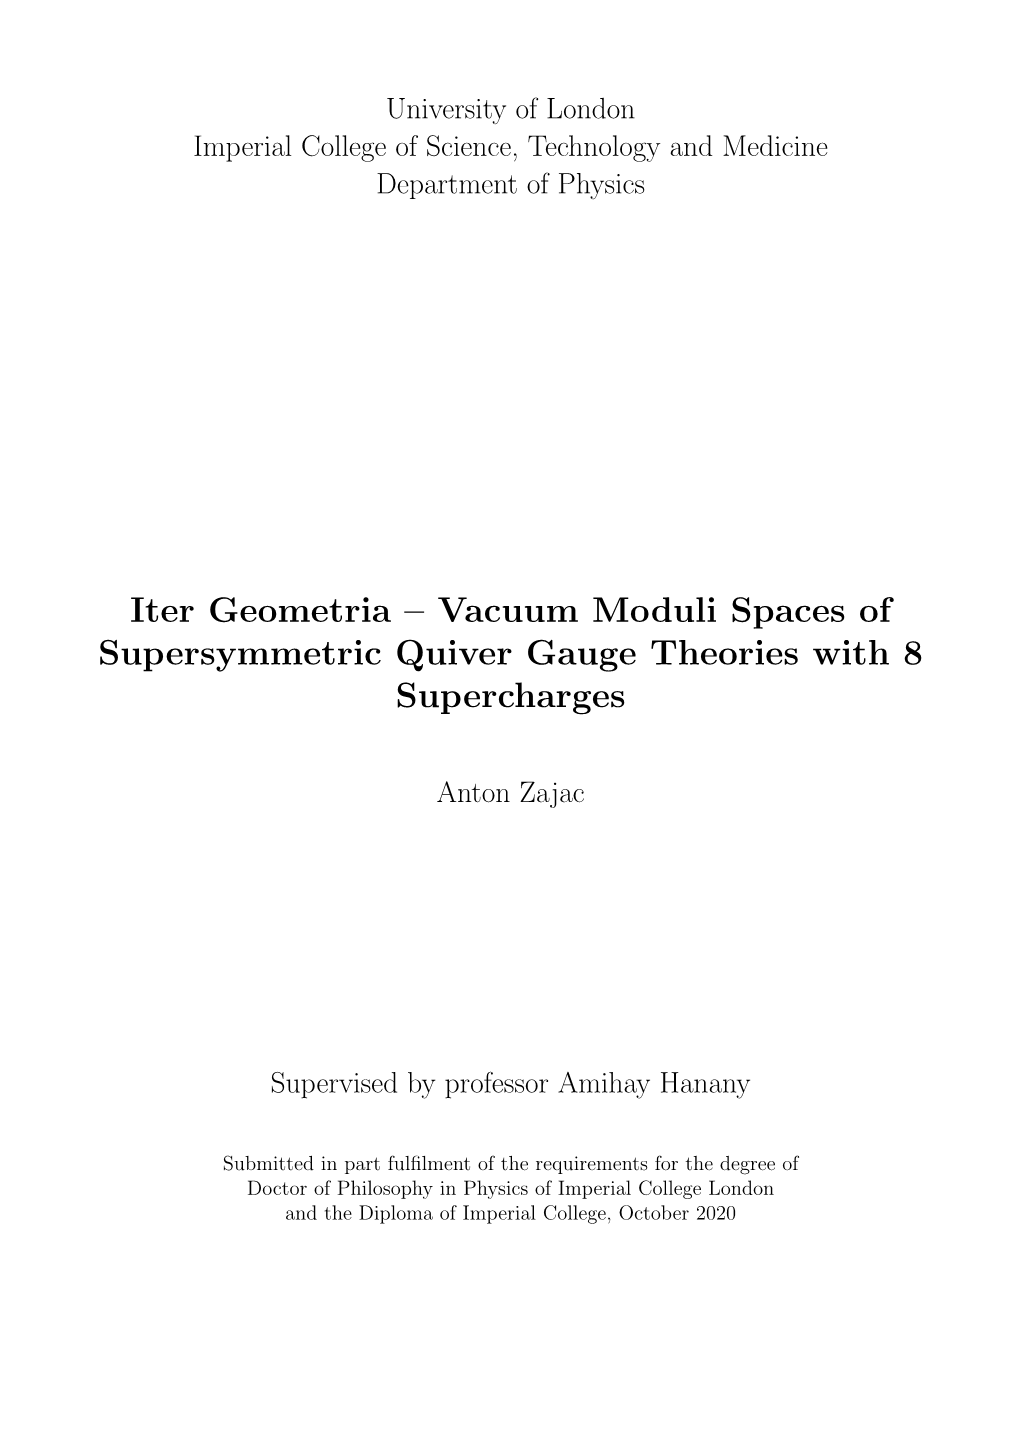 Vacuum Moduli Spaces of Supersymmetric Quiver Gauge Theories with 8 Supercharges